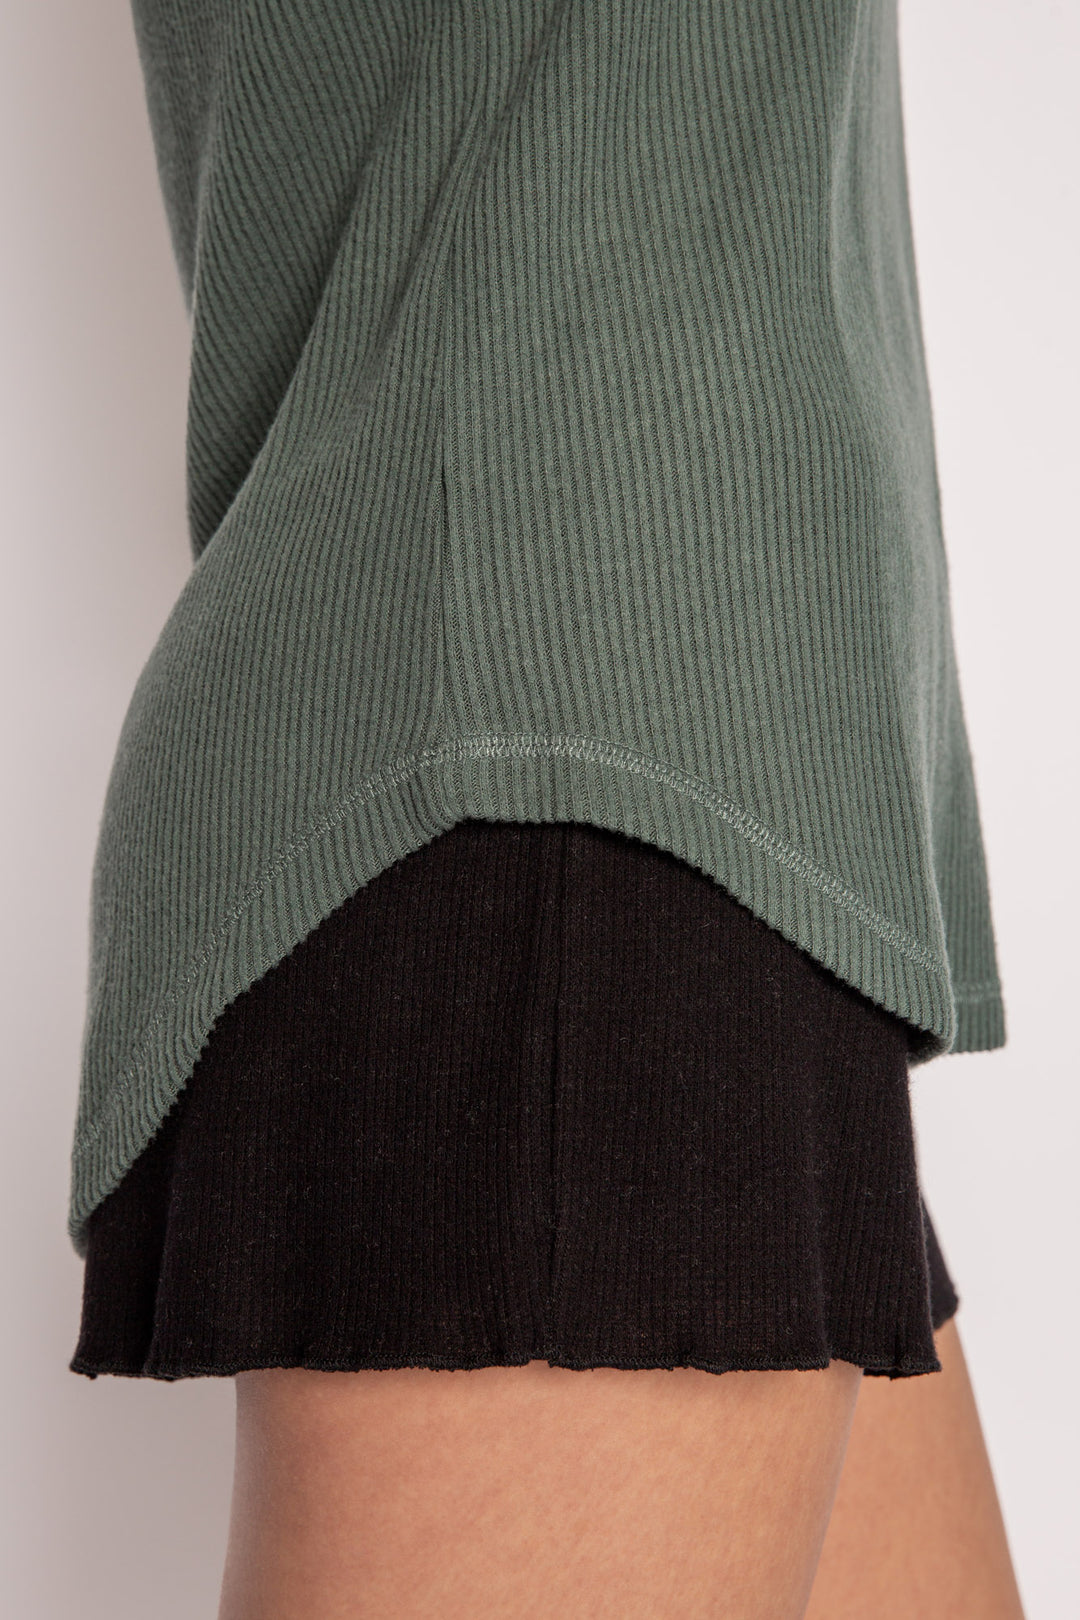 Green tank top in 2x2 brushed rib, with a rounded V-neck. Relaxed fit with rounded hem. (7122613010532)